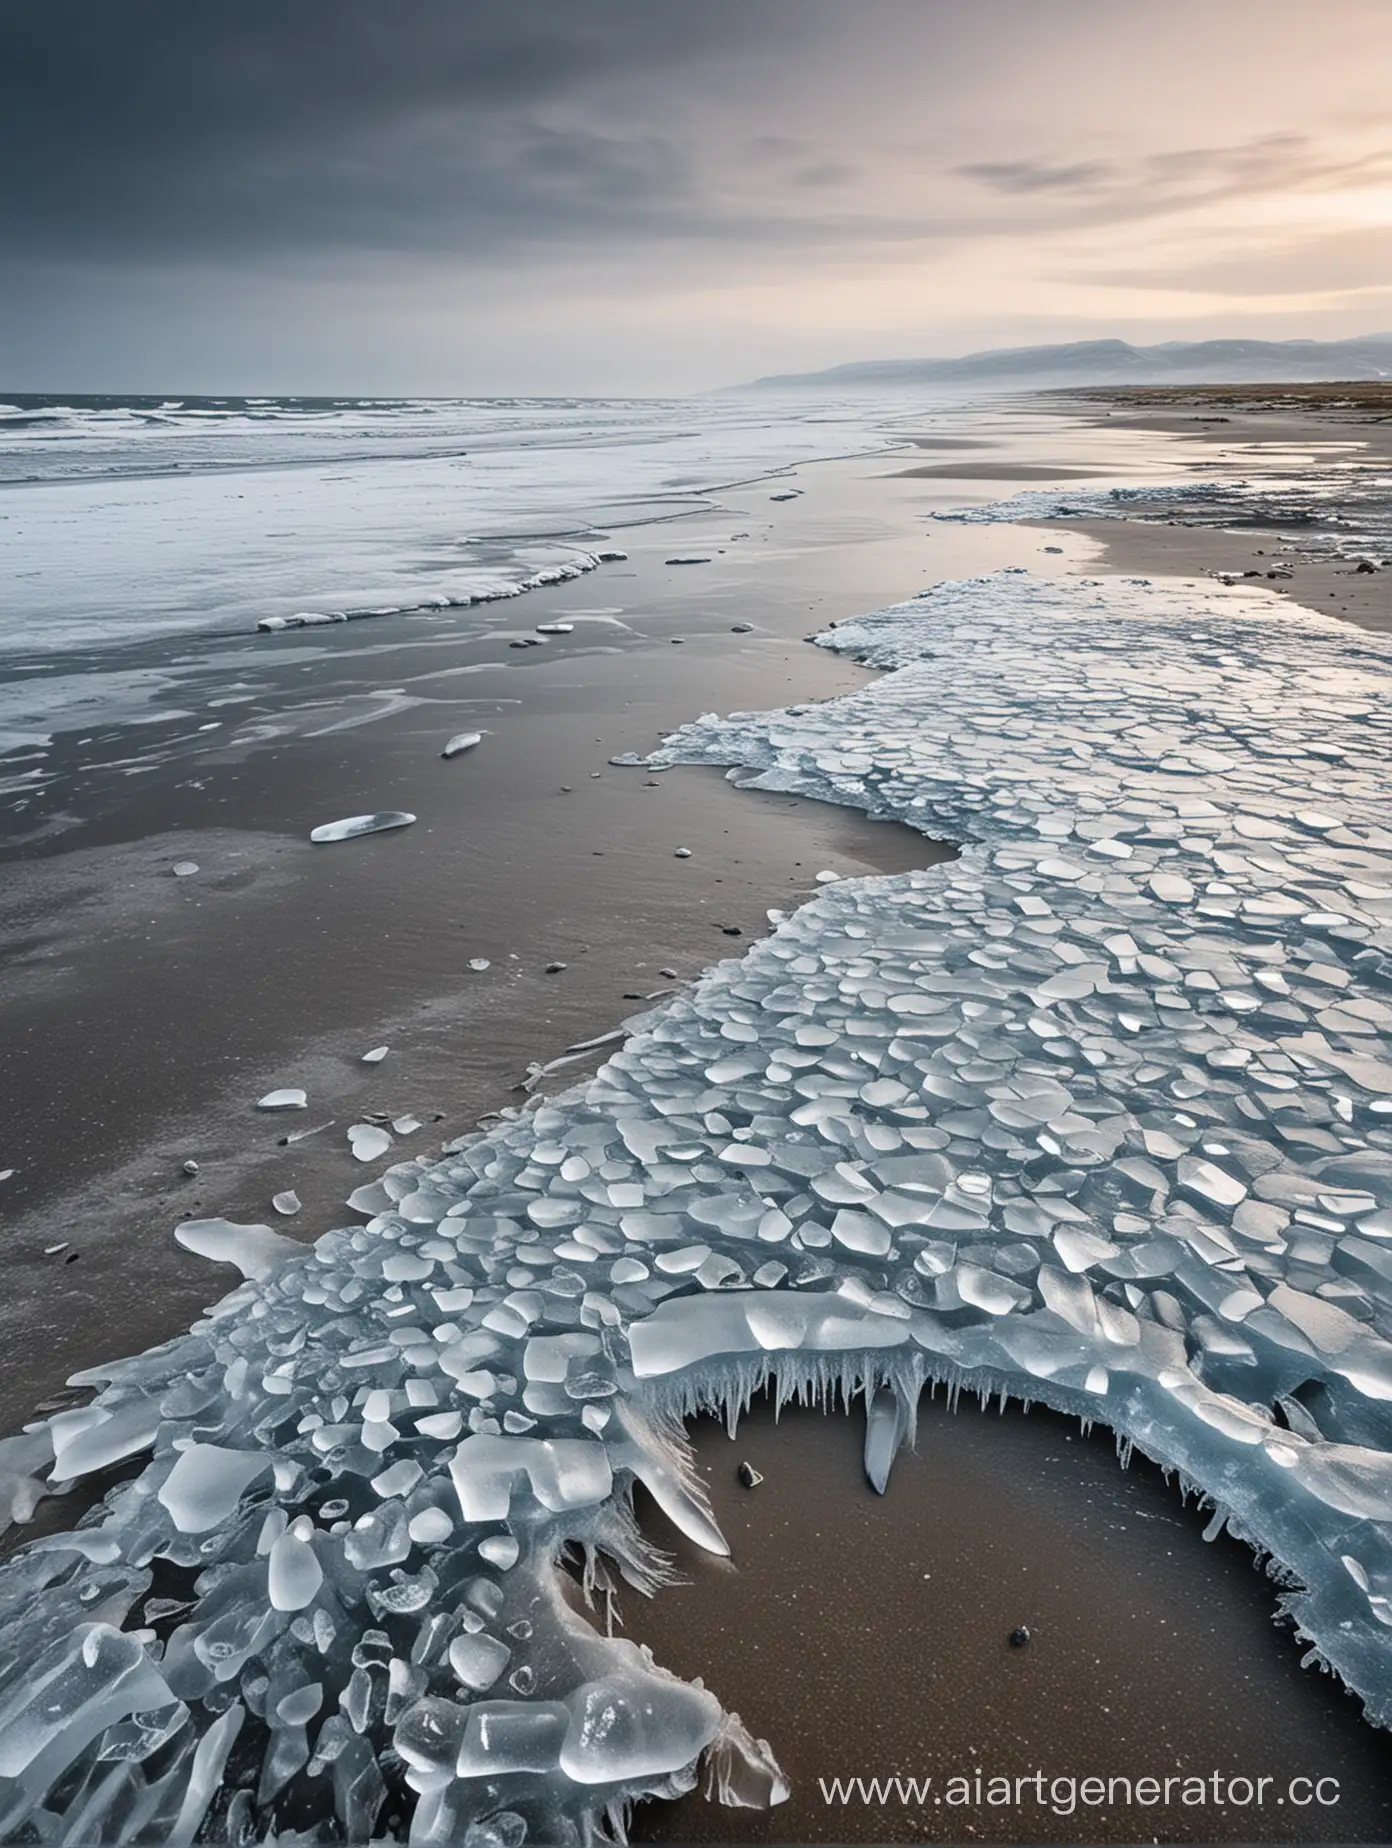 Solitude-on-Frozen-Shores-Tranquil-Scene-of-an-Abandoned-Beach-with-Icy-Waters